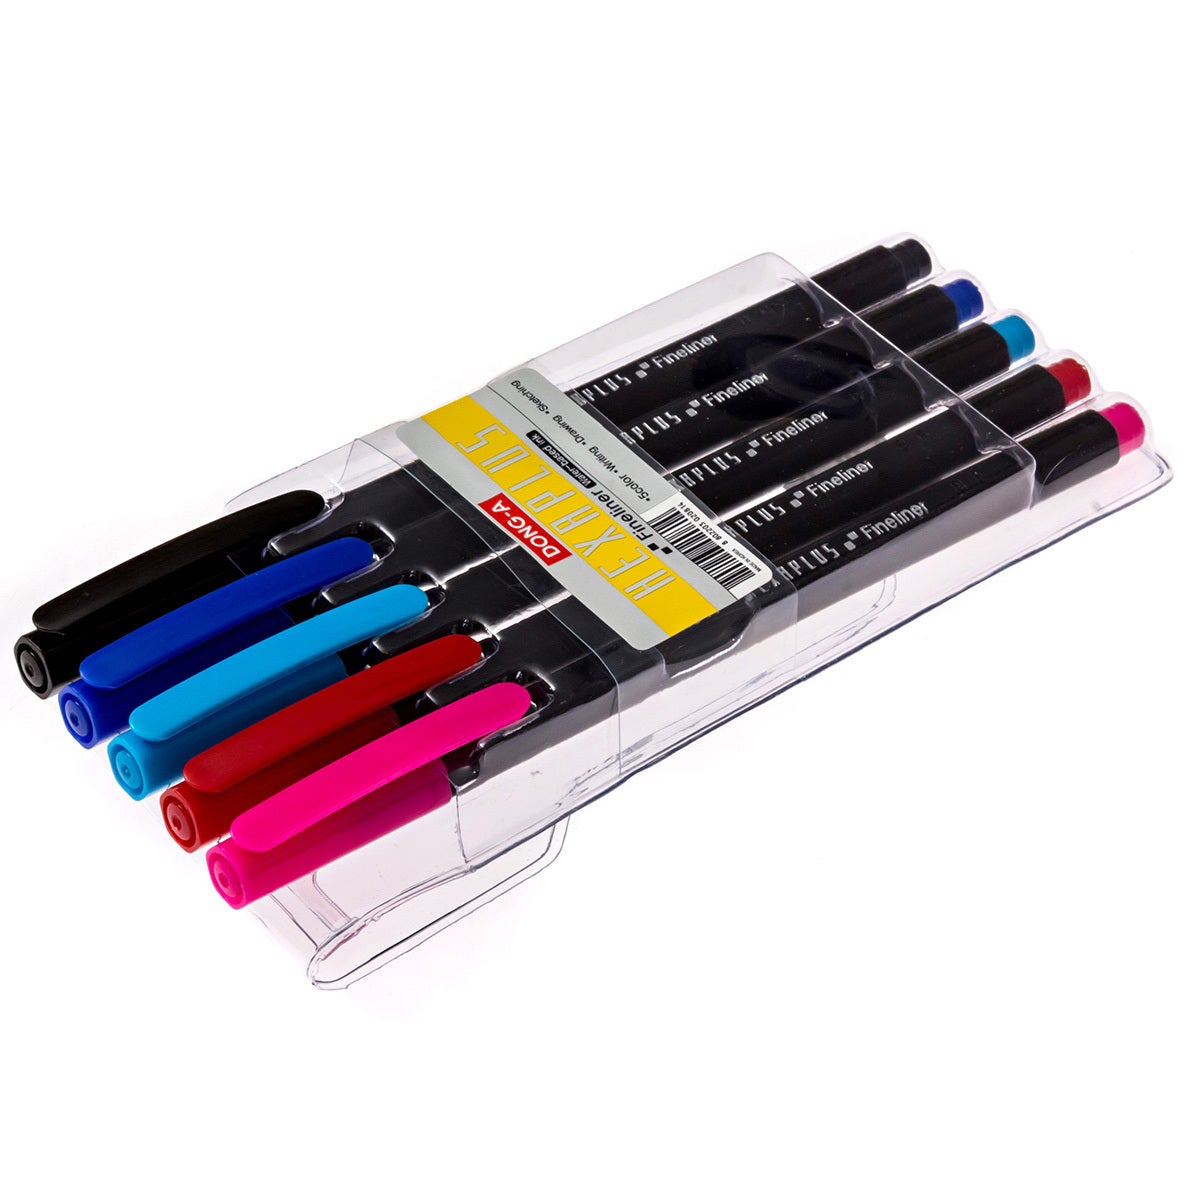 DONG-A Hexaplus Fineliner - 5 Color Set product image 2